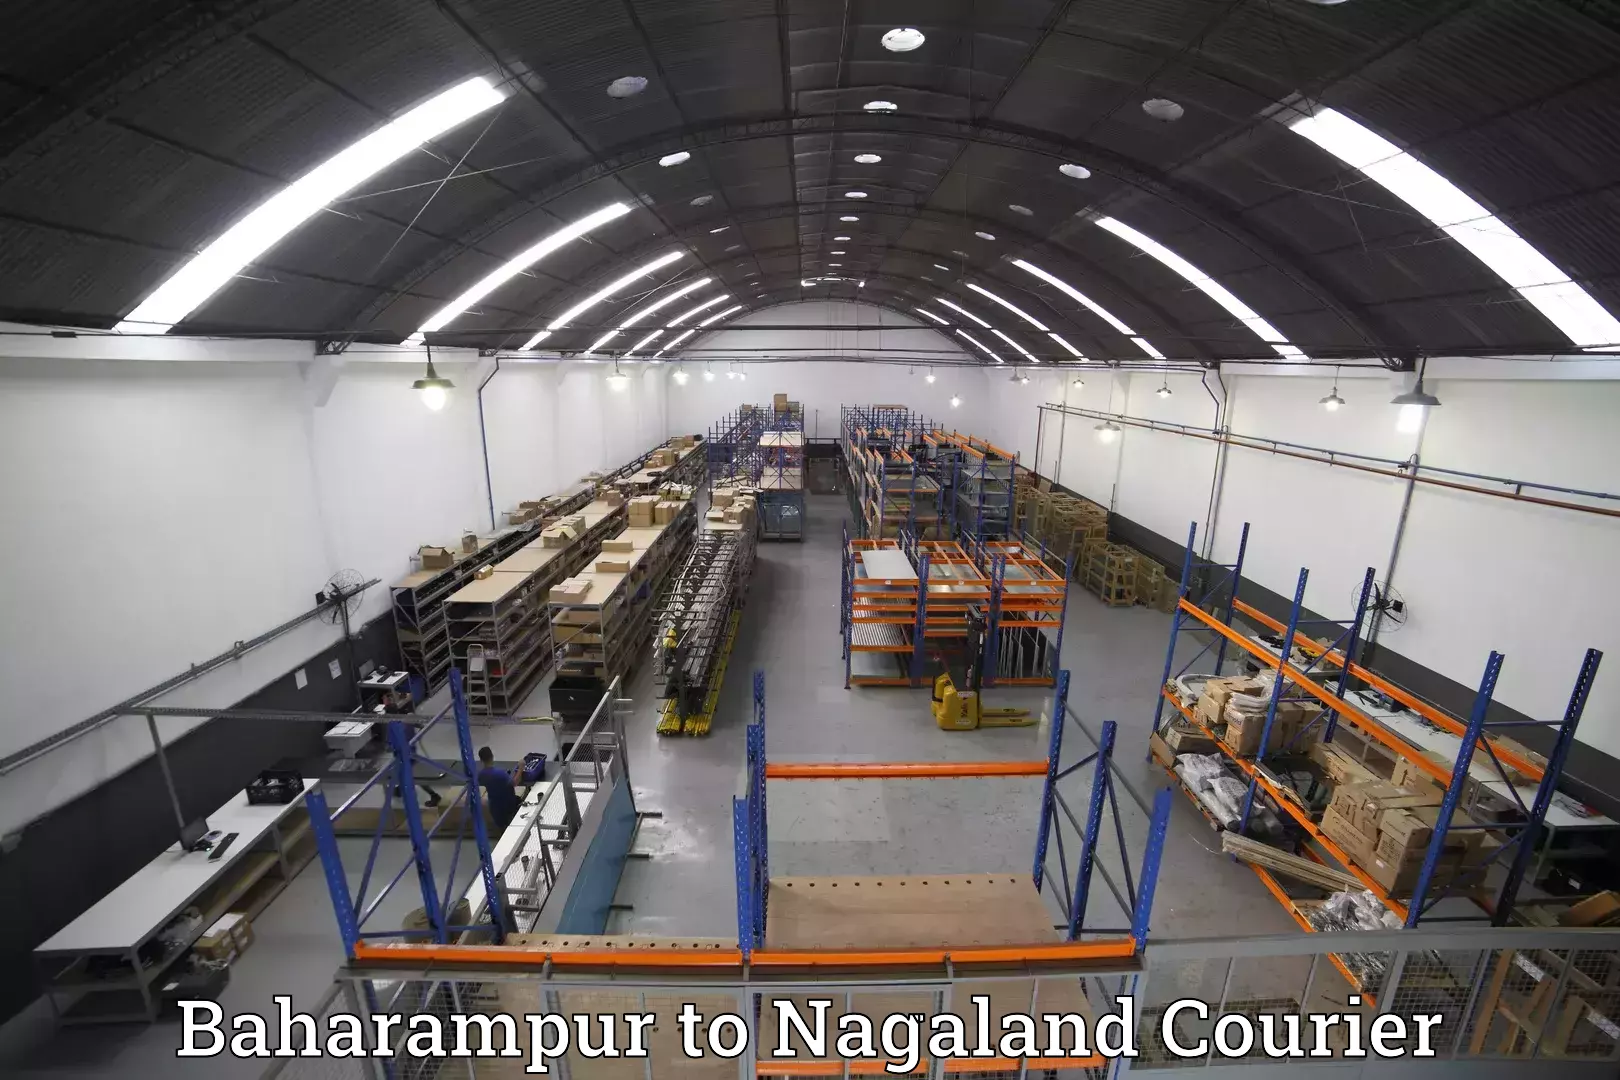 Luggage shipment specialists Baharampur to Dimapur